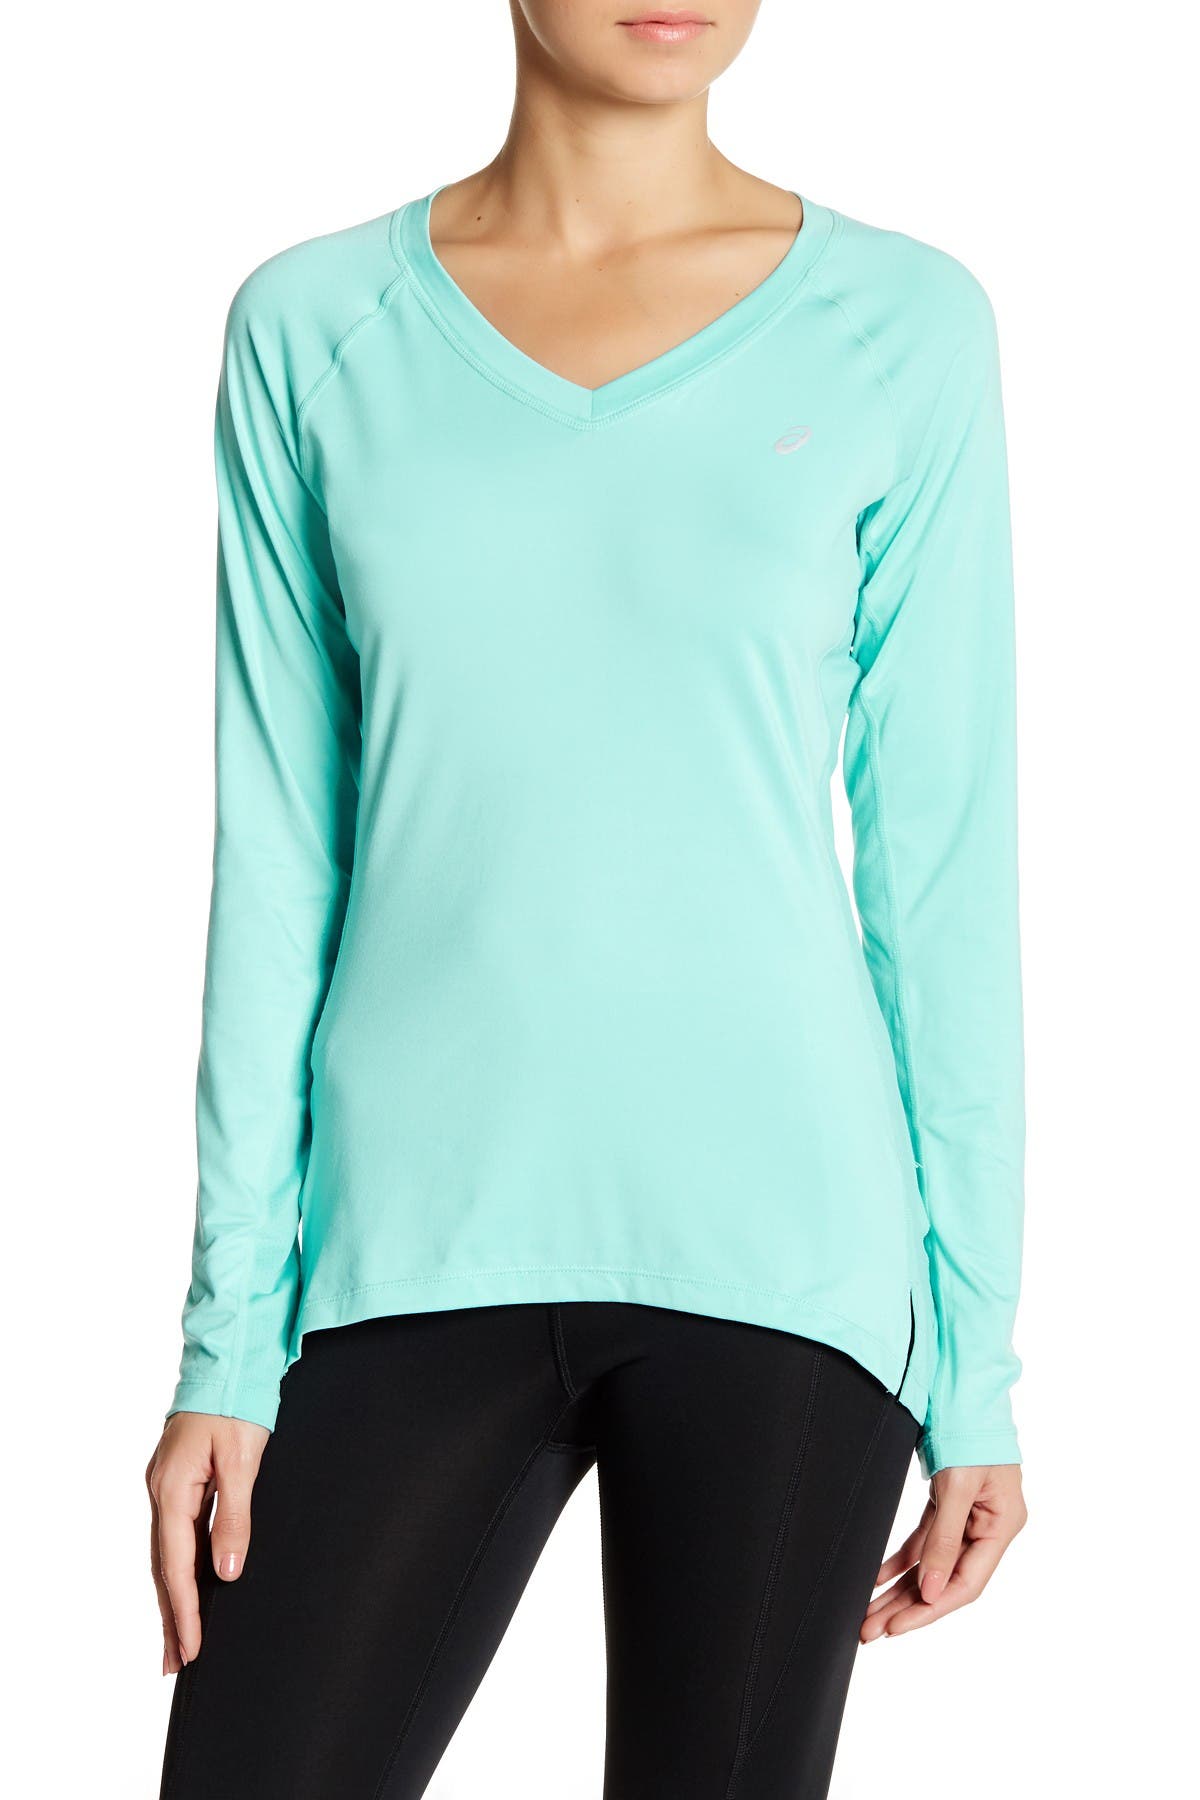 Asics Asx Dry Long Sleeve Shirt In Open Miscellaneous